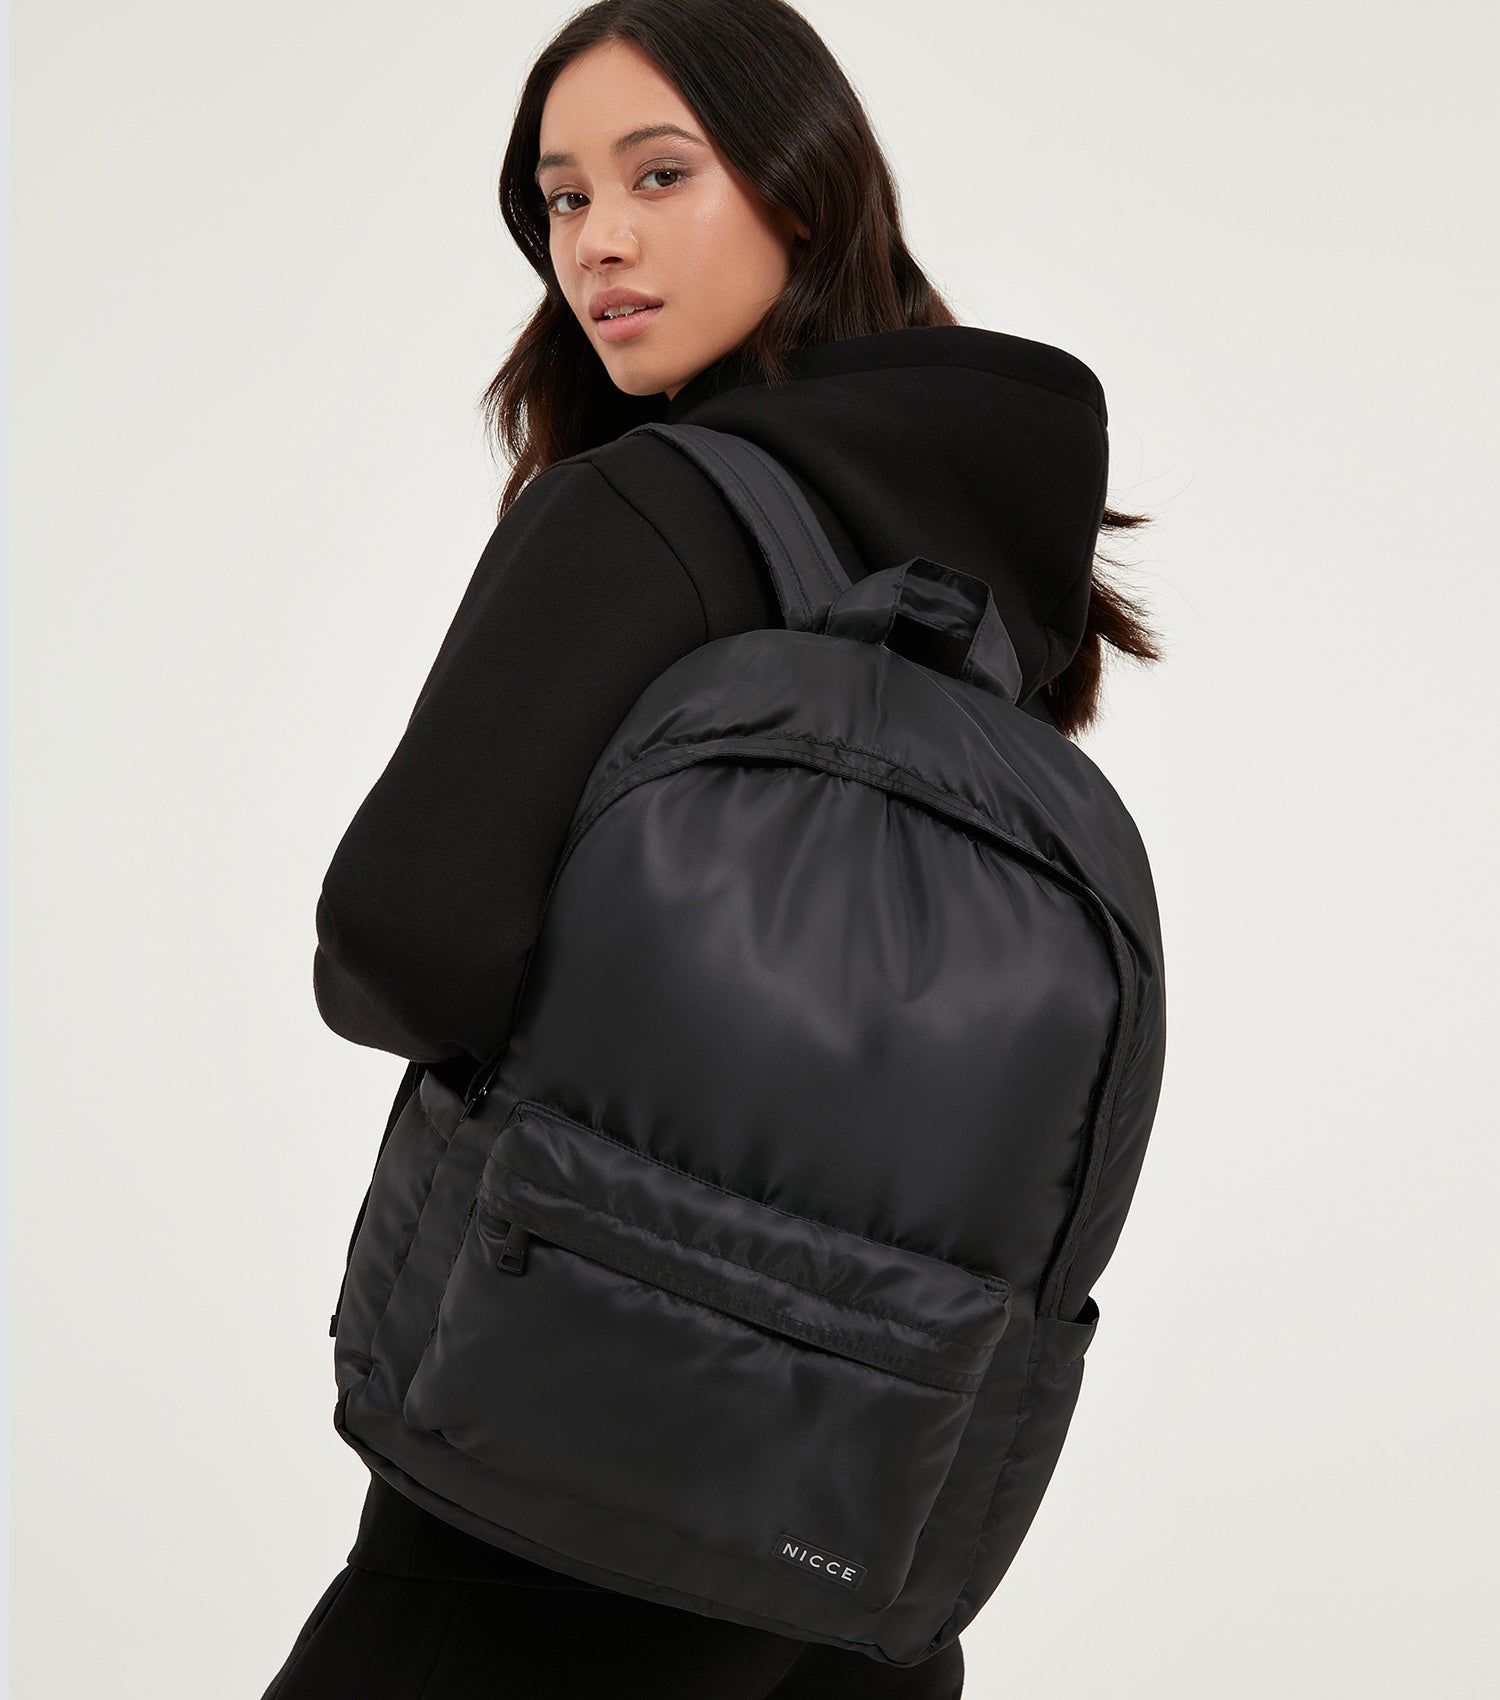 Nicce Expo Backpack | Black – NICCE